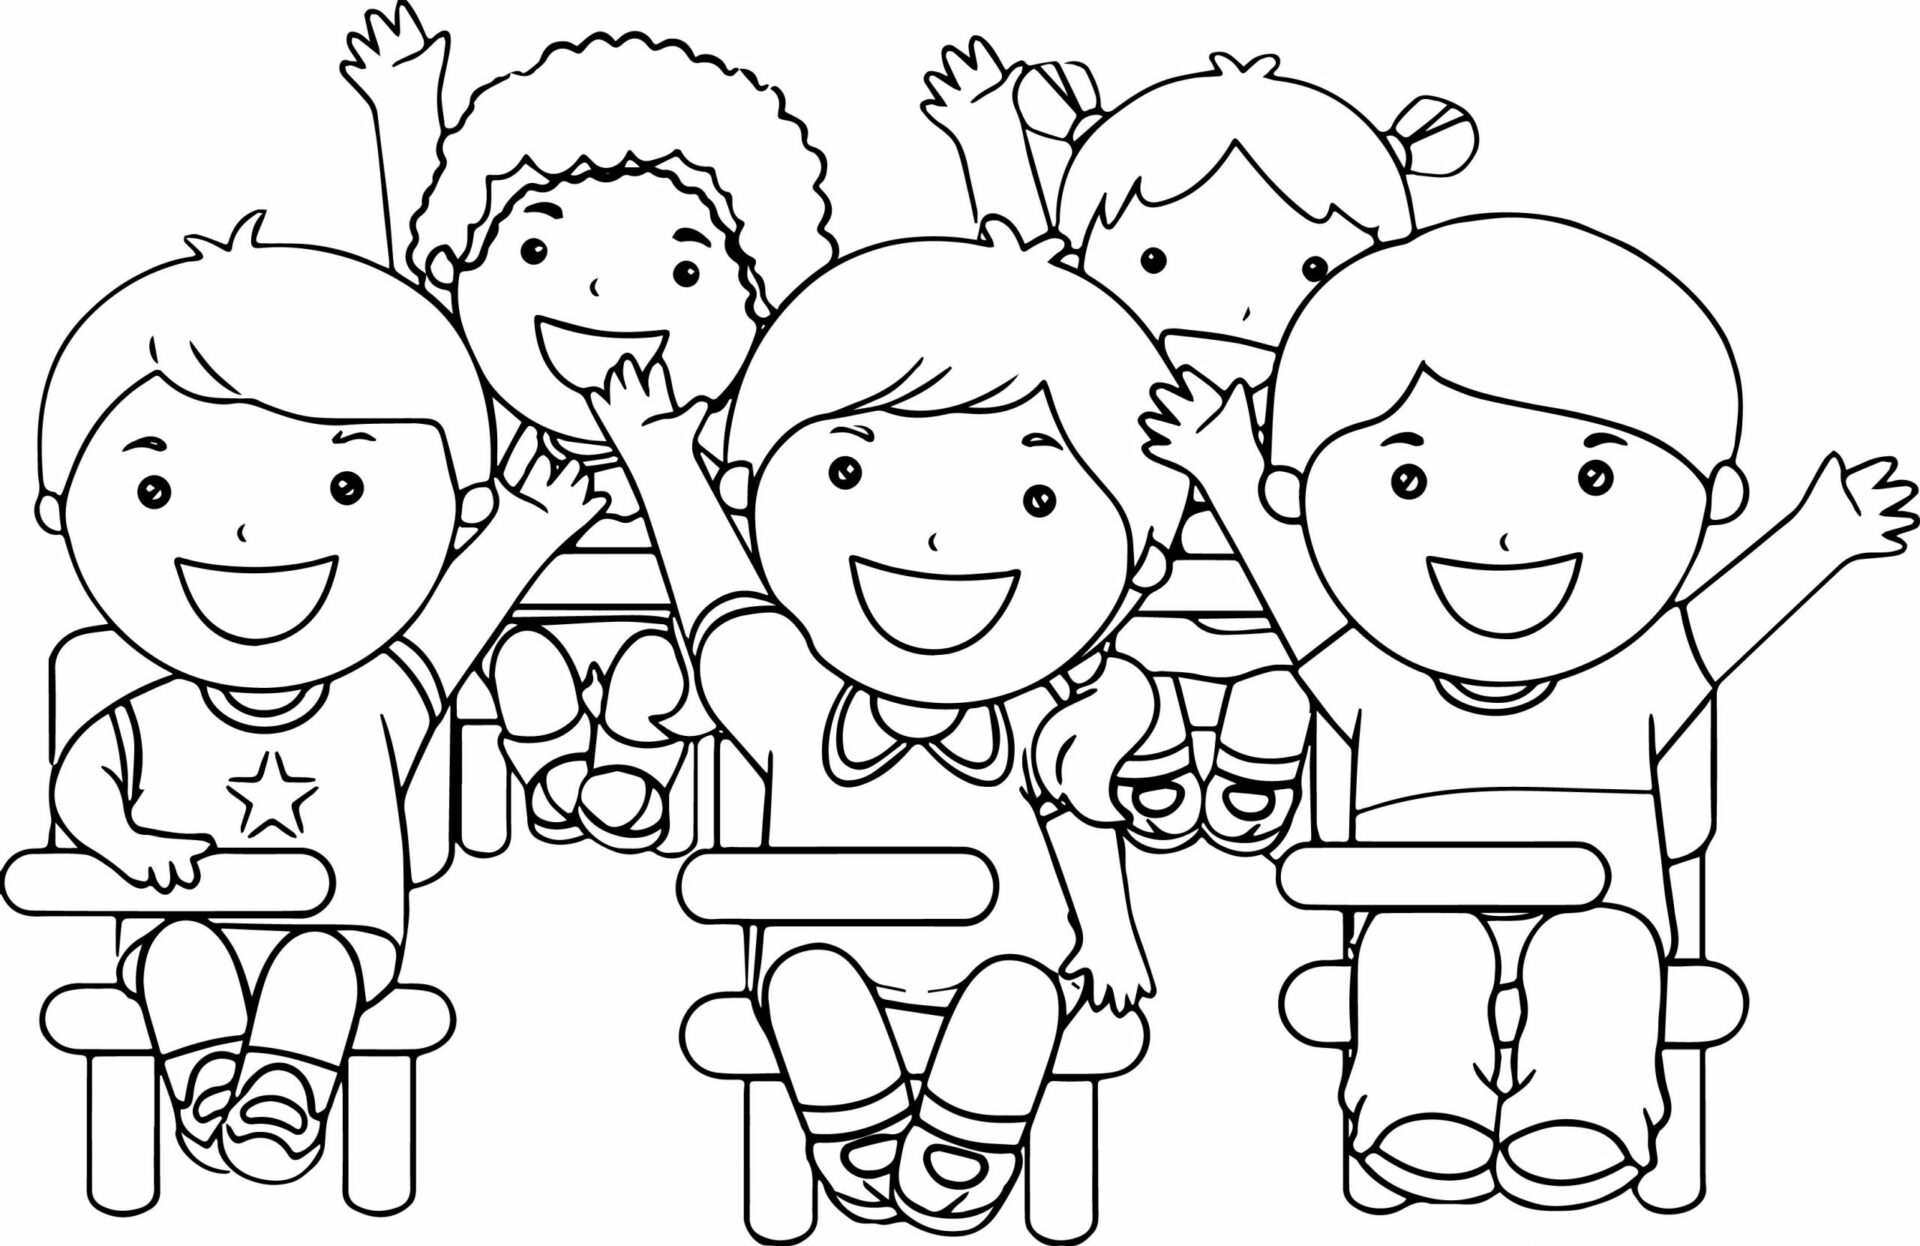 kids-studying-coloring-page-free-printable-coloring-pages-for-kids